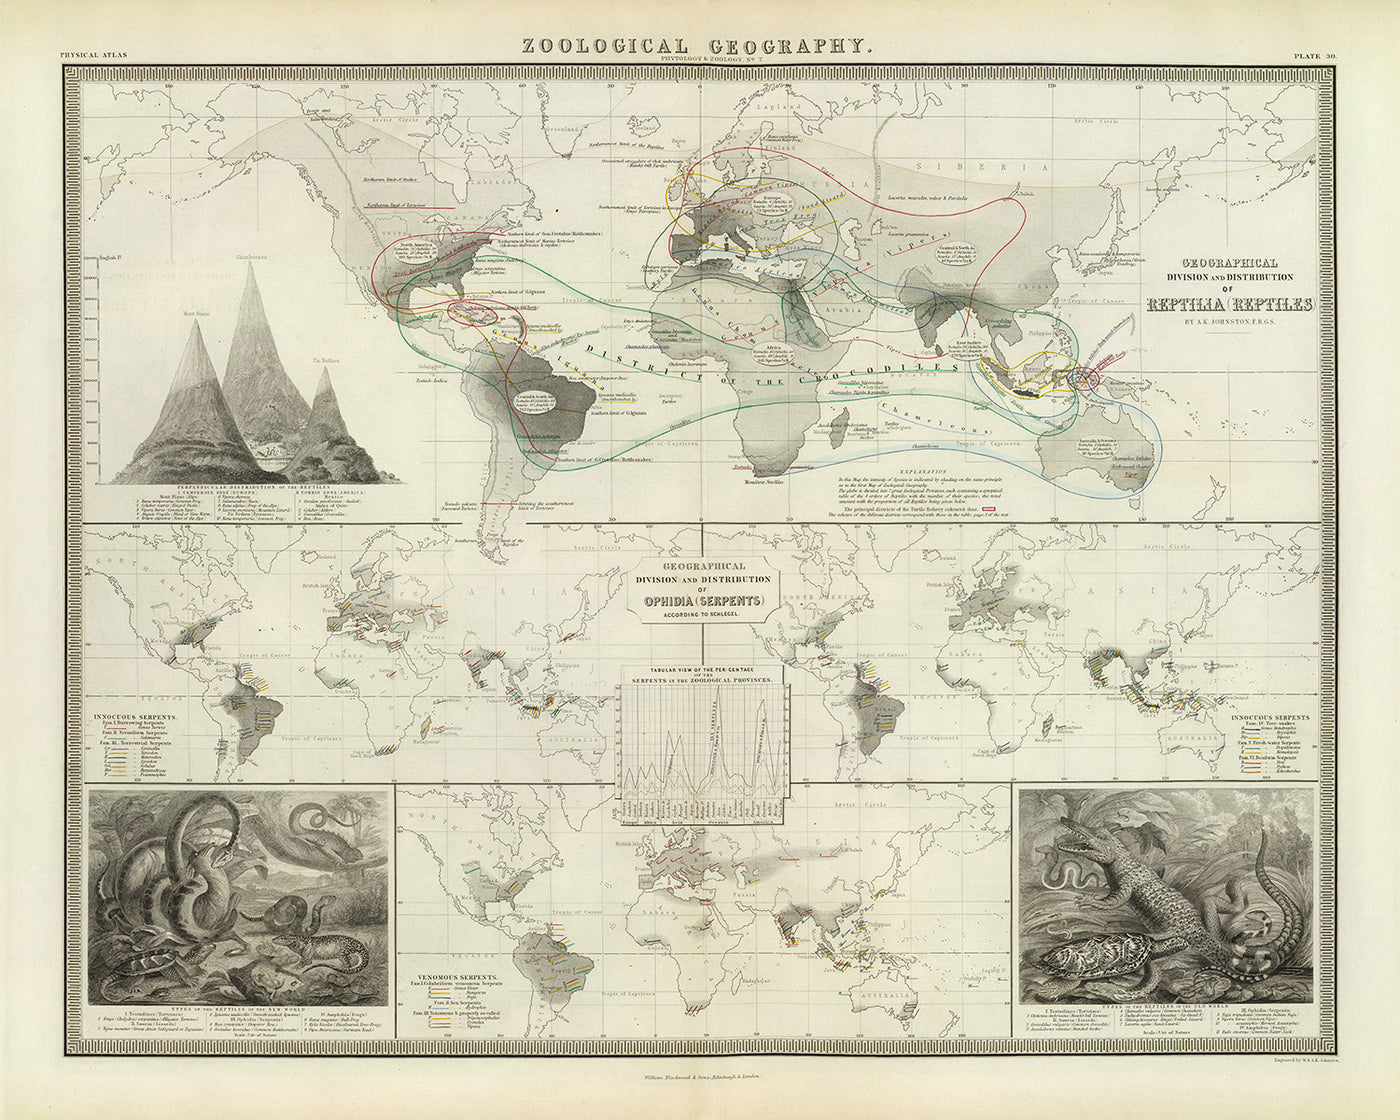 Old World Map of Reptile Distribution by Johnston, 1856: Snakes, Lizards, and Other Reptile Illustrations